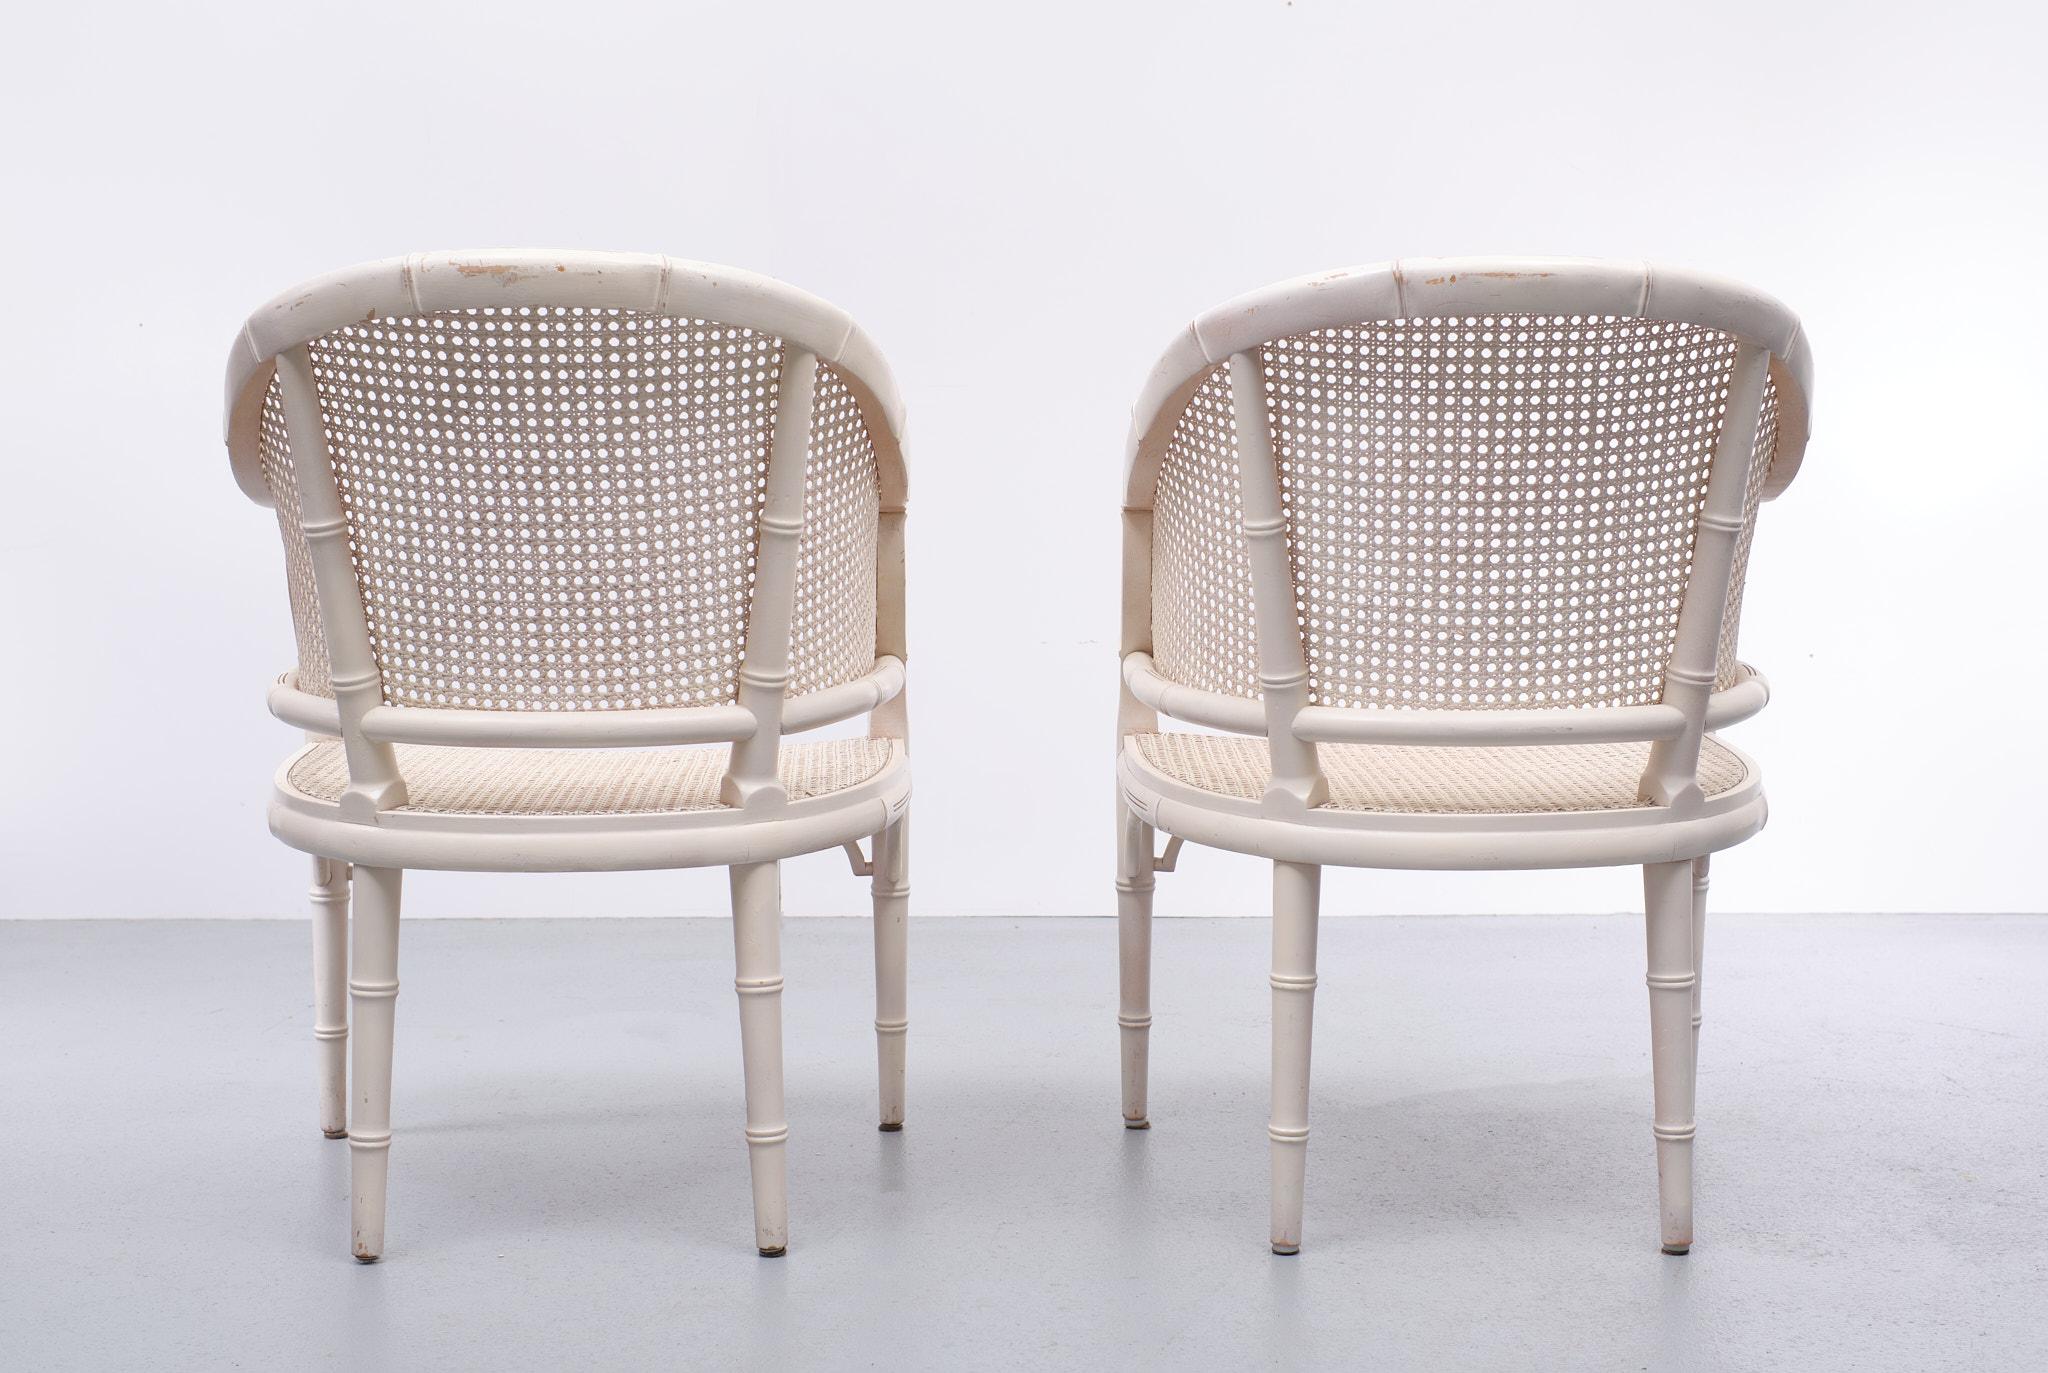 European Pair of Mid-Century Faux-Bamboo Caned Barrel Chairs, 1970s